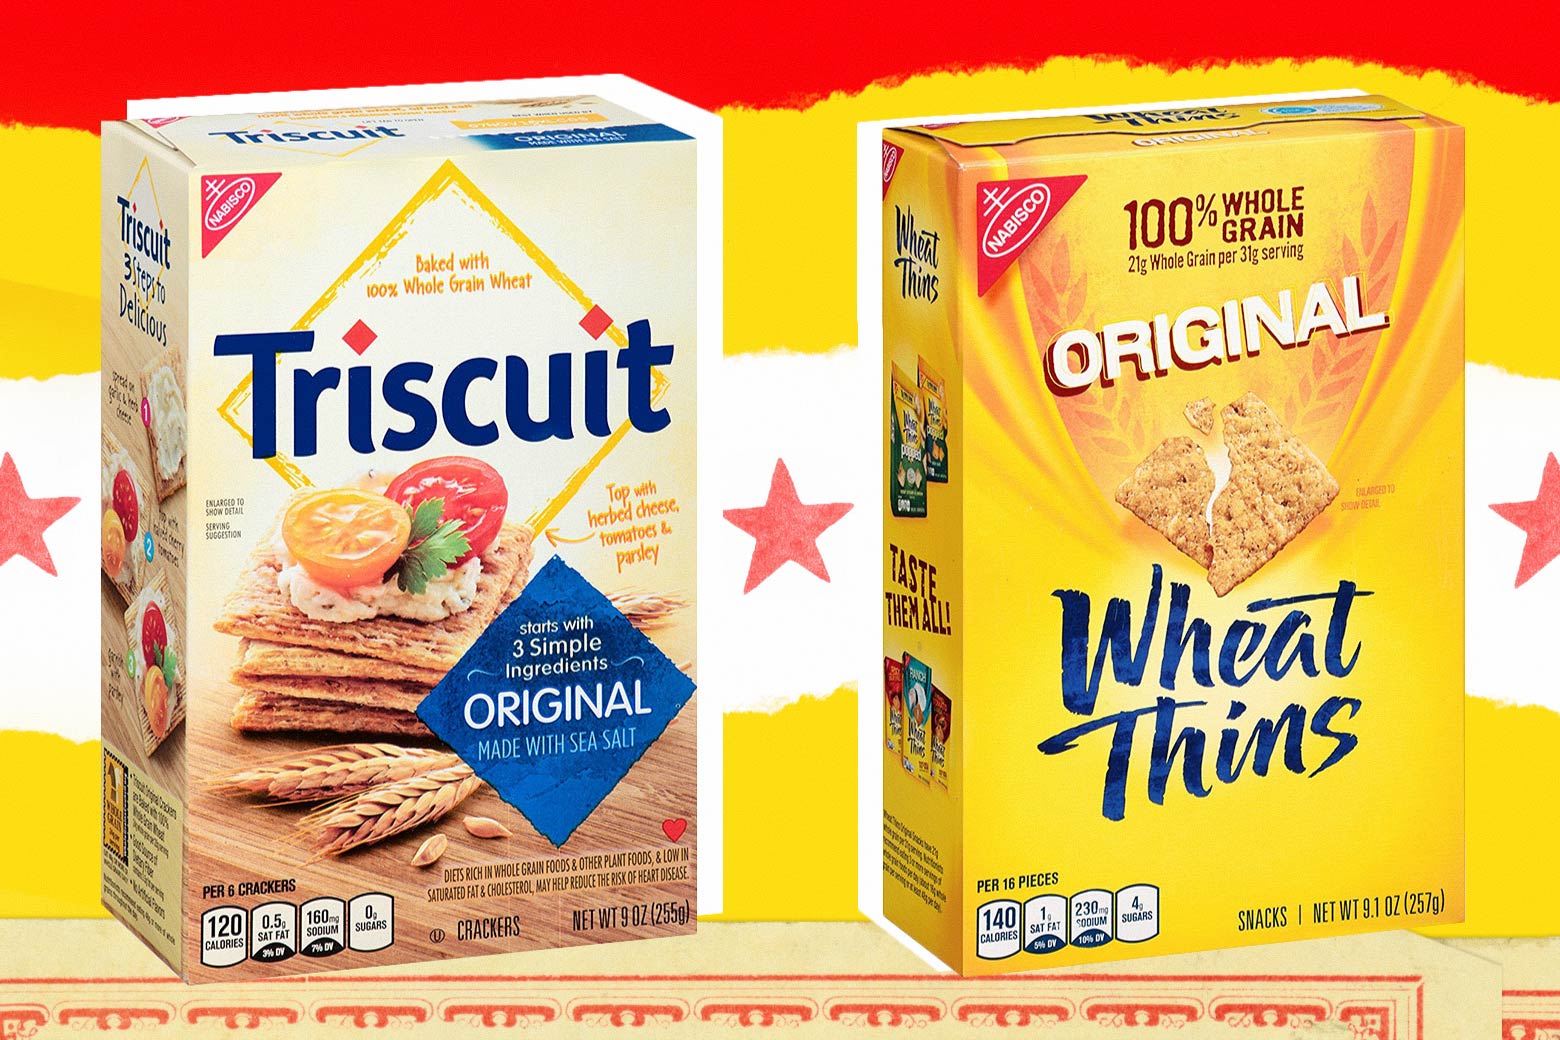 Photo illustration: a box of Triscuits and a box of Wheat Thins. Photo illustration by Slate.